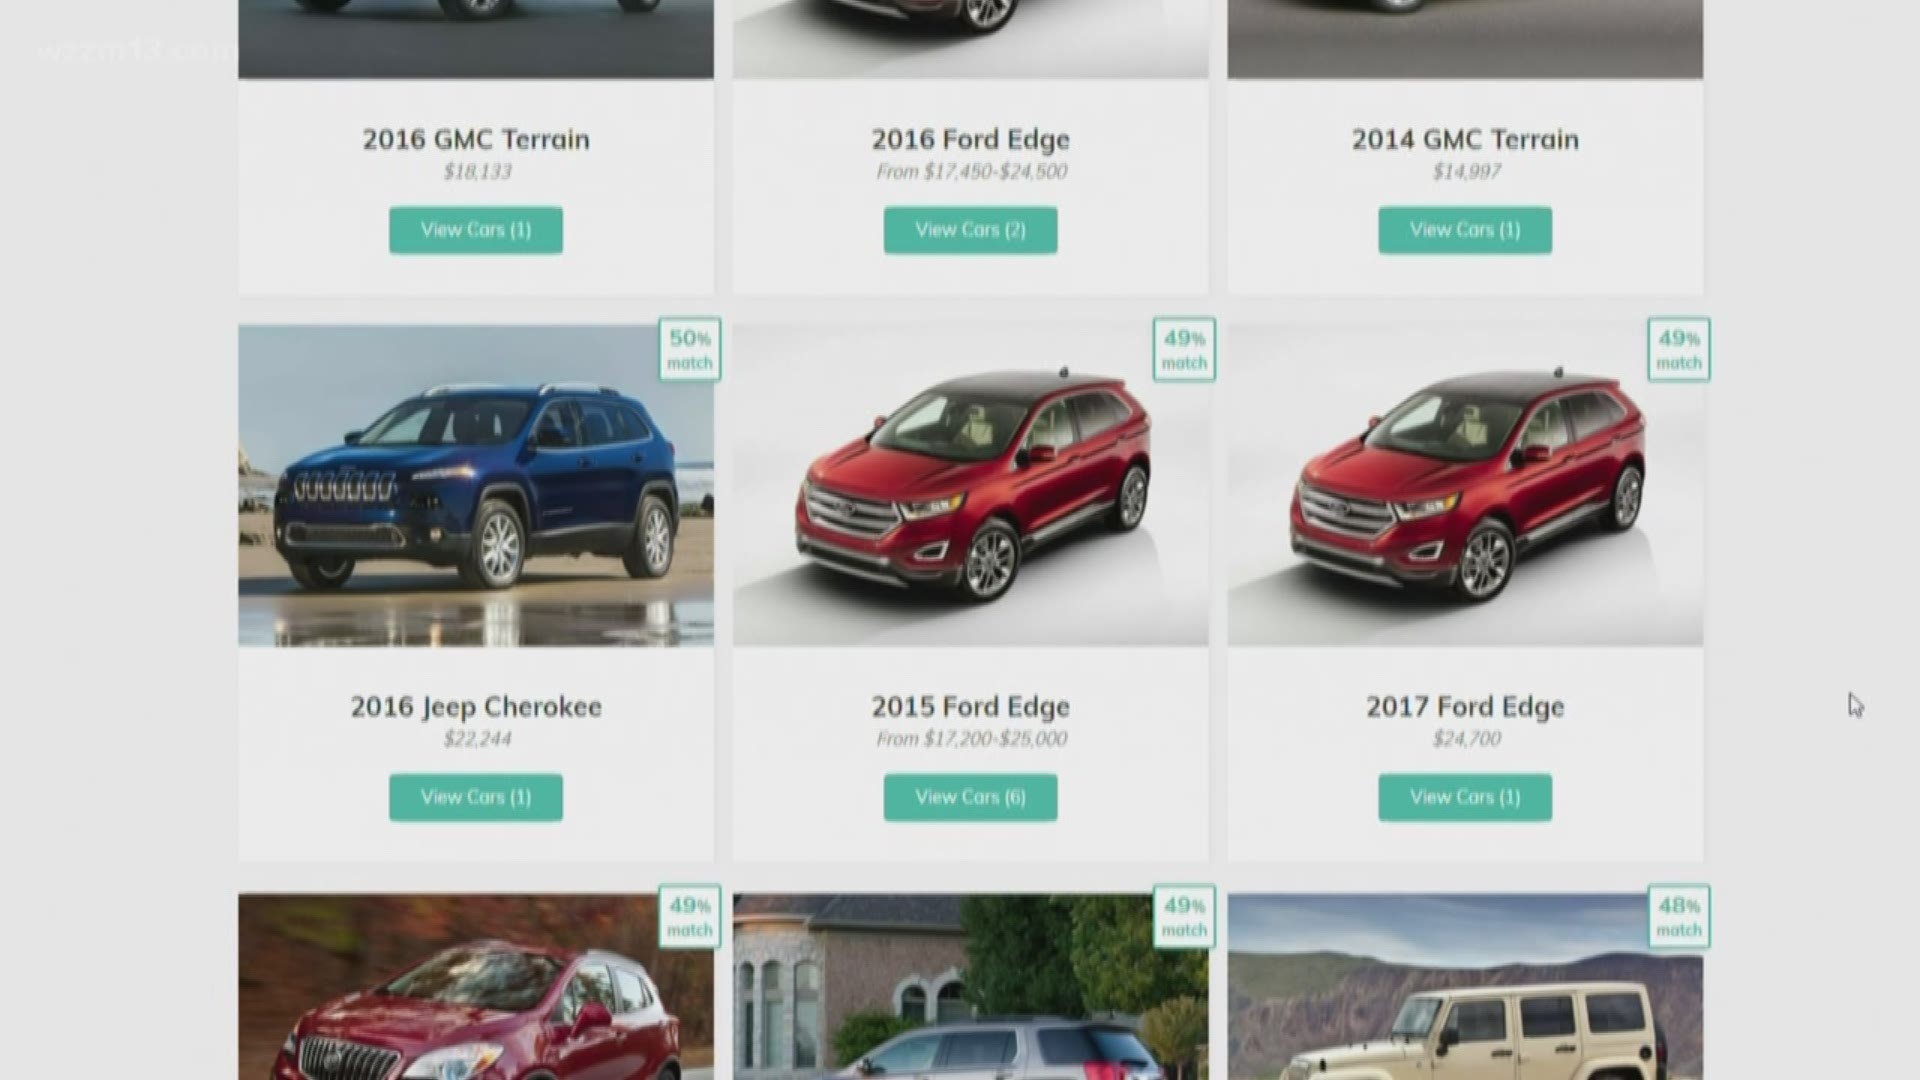 Finding your new car online